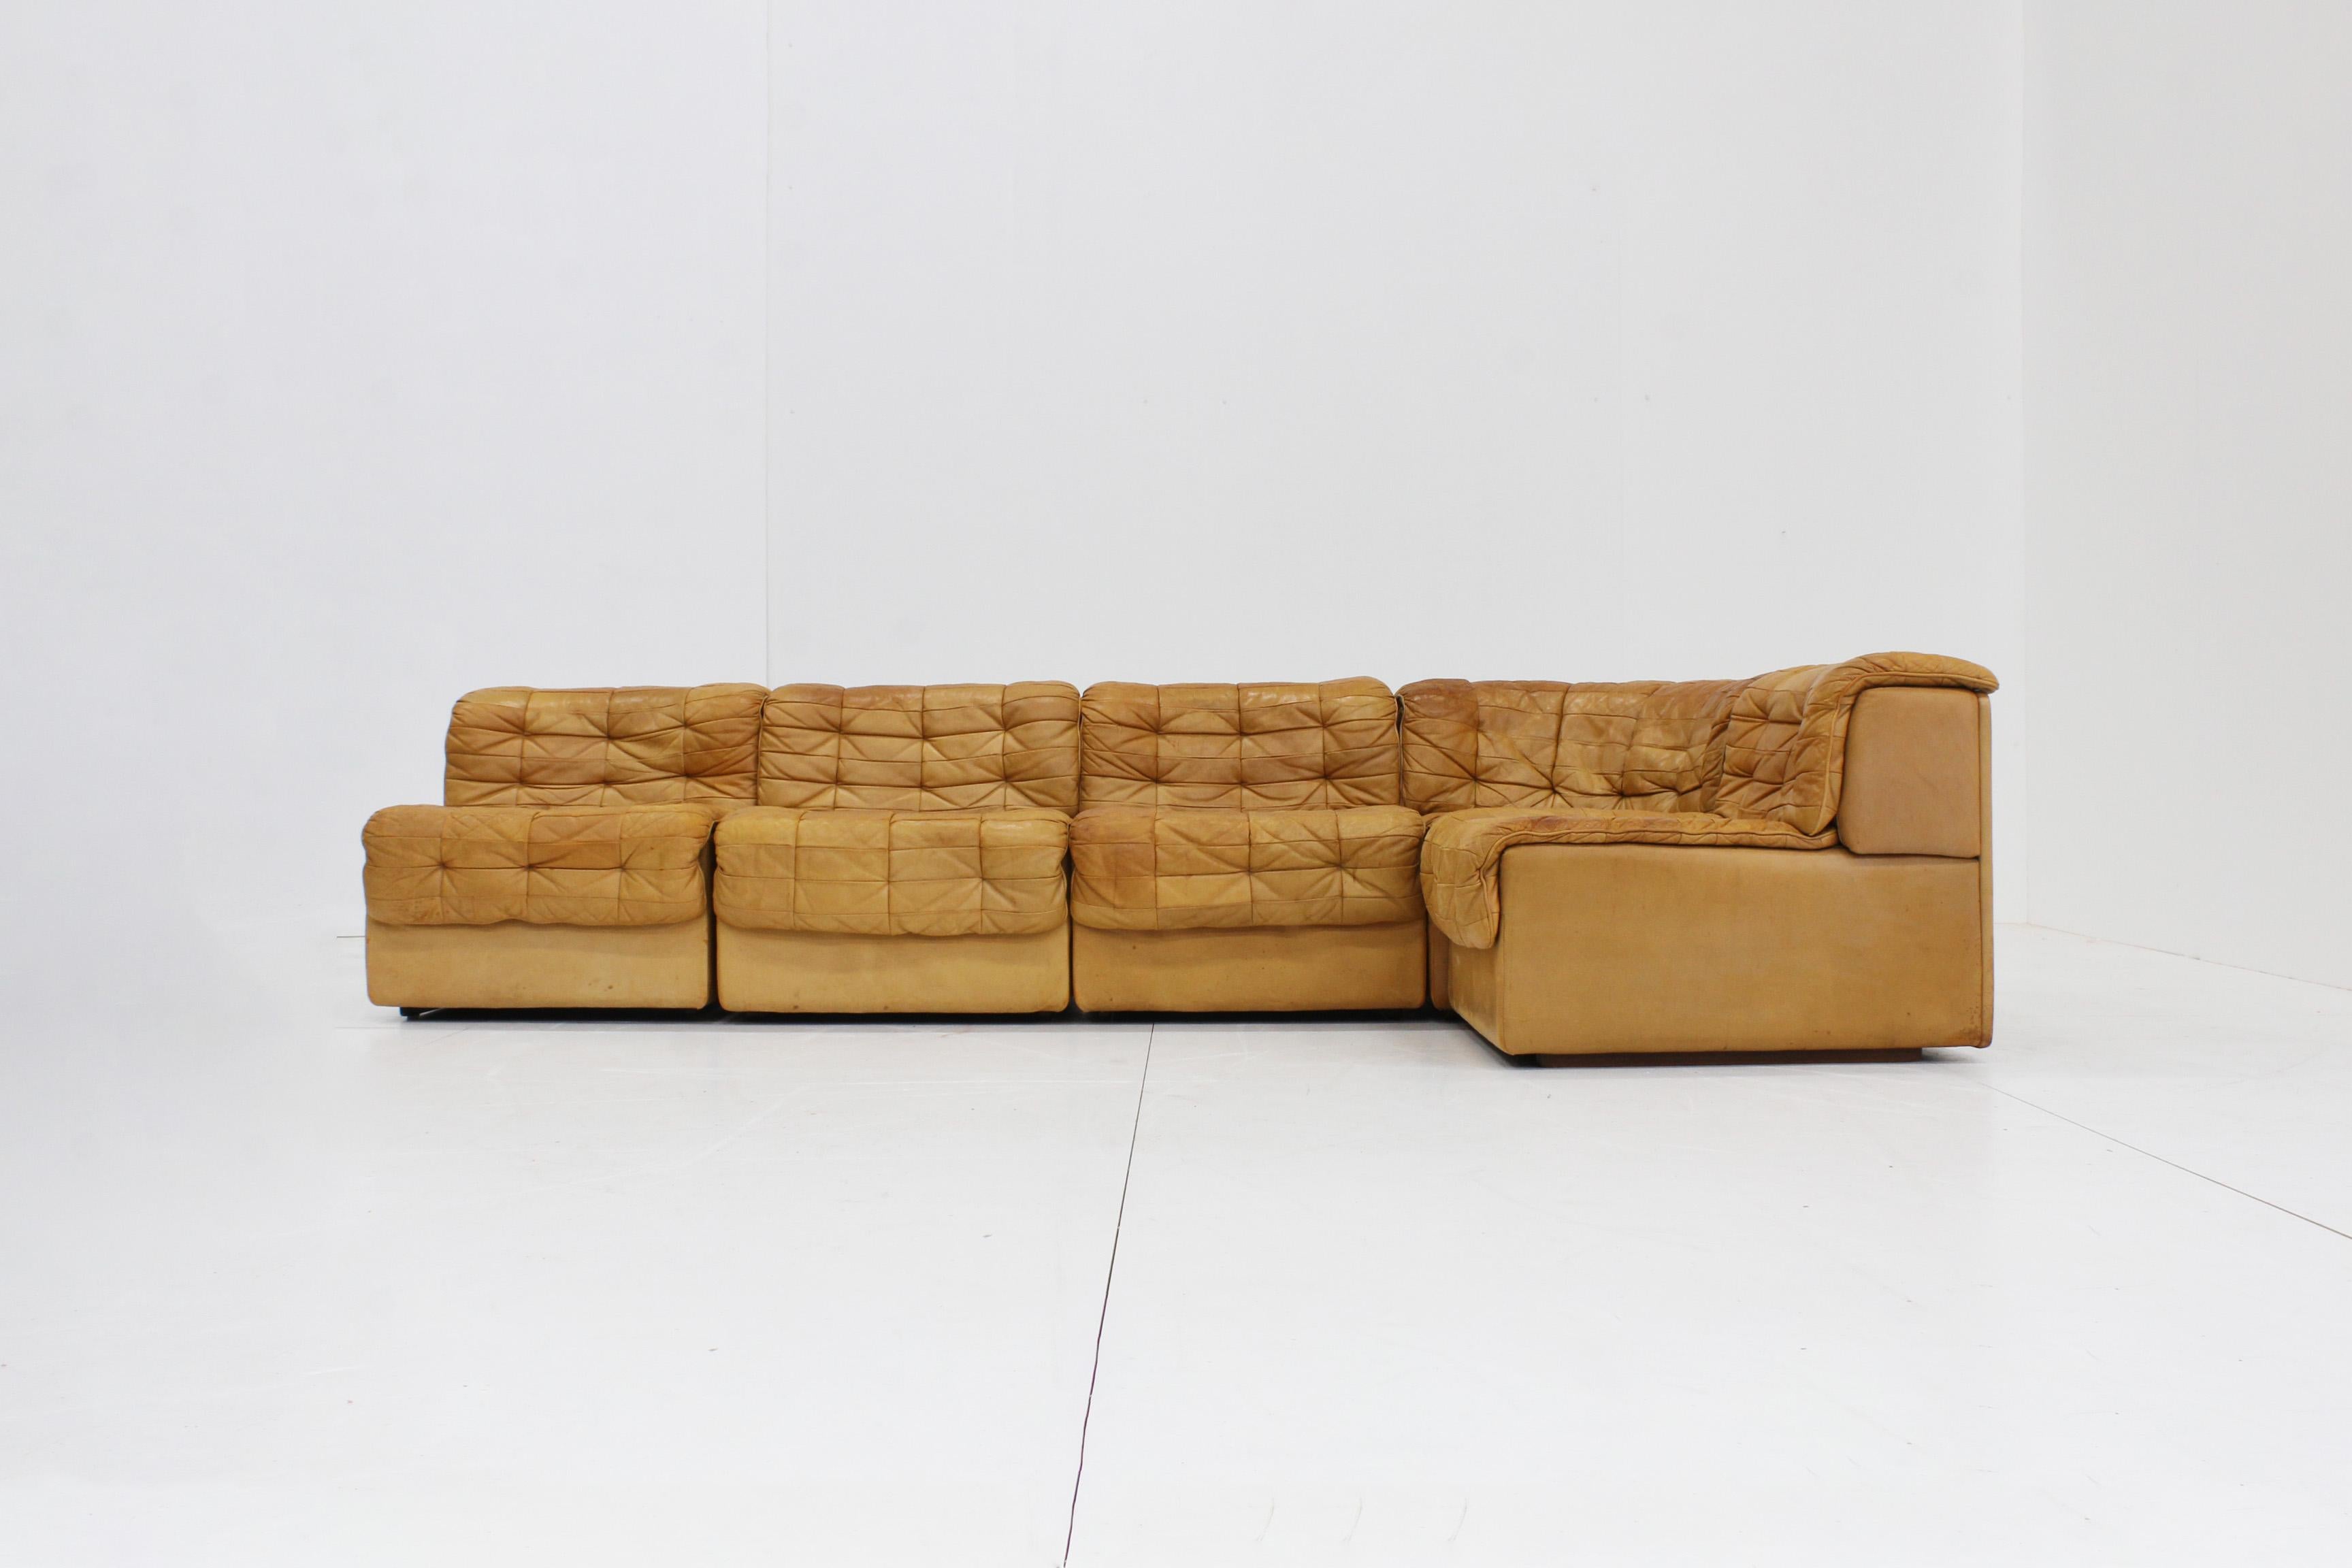 Original vintage De Sede DS-11. The sofa has 5 parts, 1 of which is a corner element. Equipped with cognac leather with beautiful patina. Please view the photos to see the condition. This sofa provides a statement and character in your interior. The